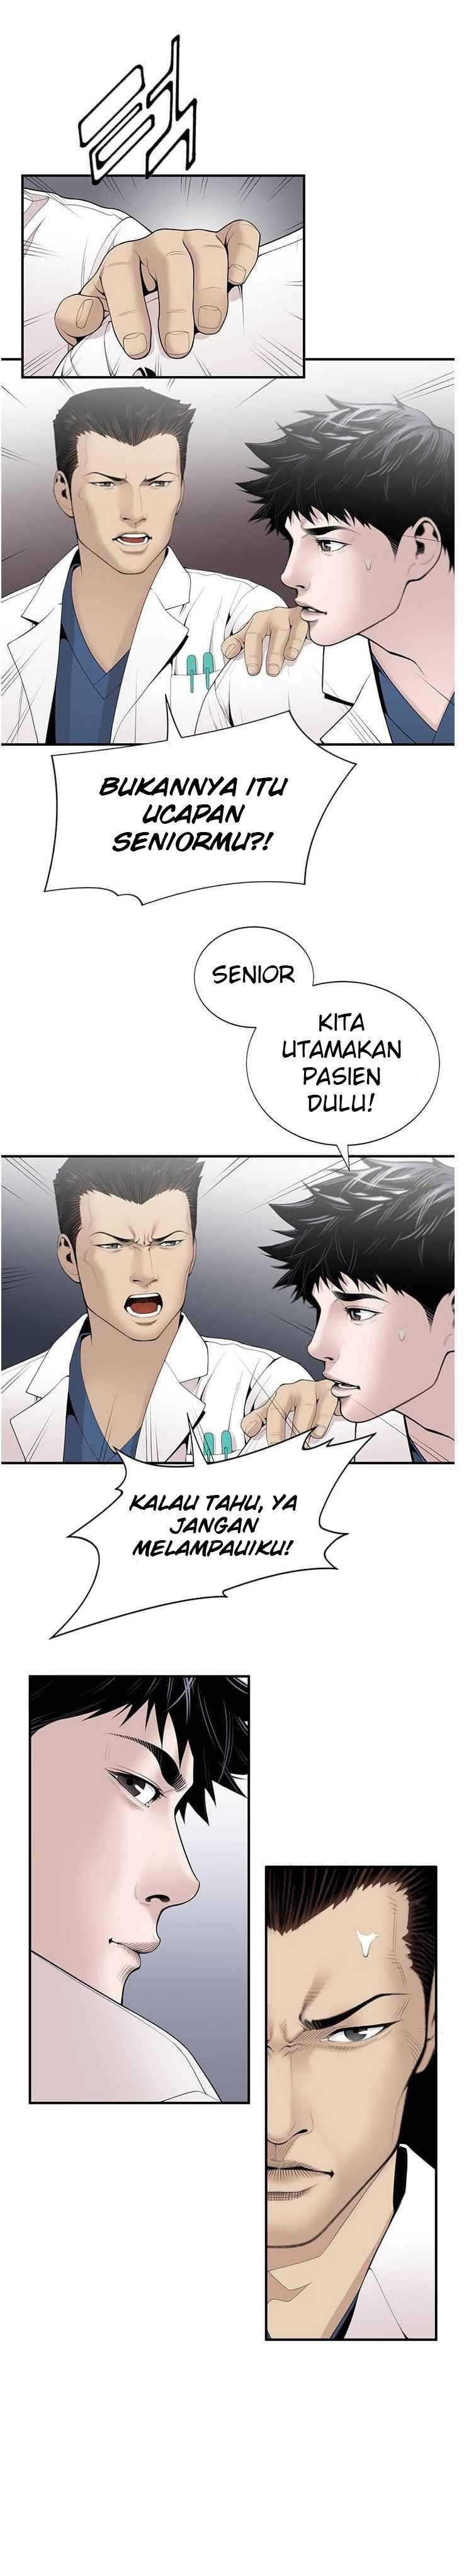 Dr. Choi Tae-Soo Chapter 16